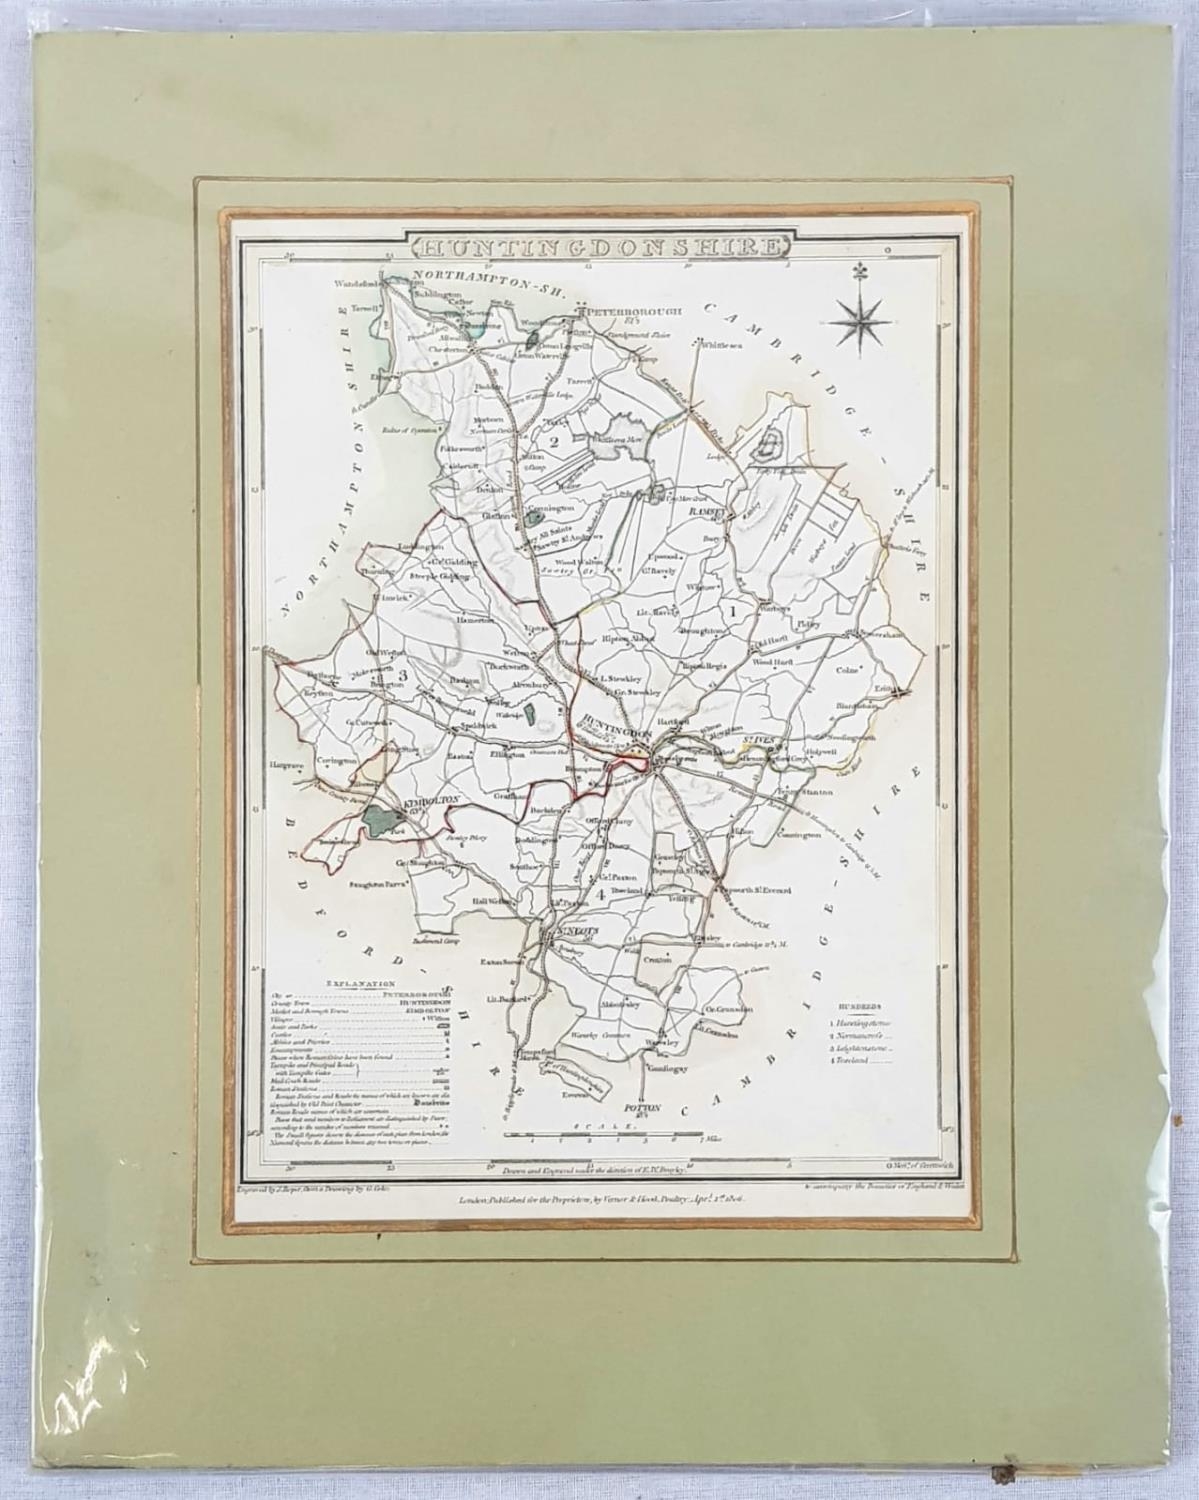 Antique 1806 Map of Huntingdonshire. Framed and protected in a plastic wrap. Good condition. 27 x